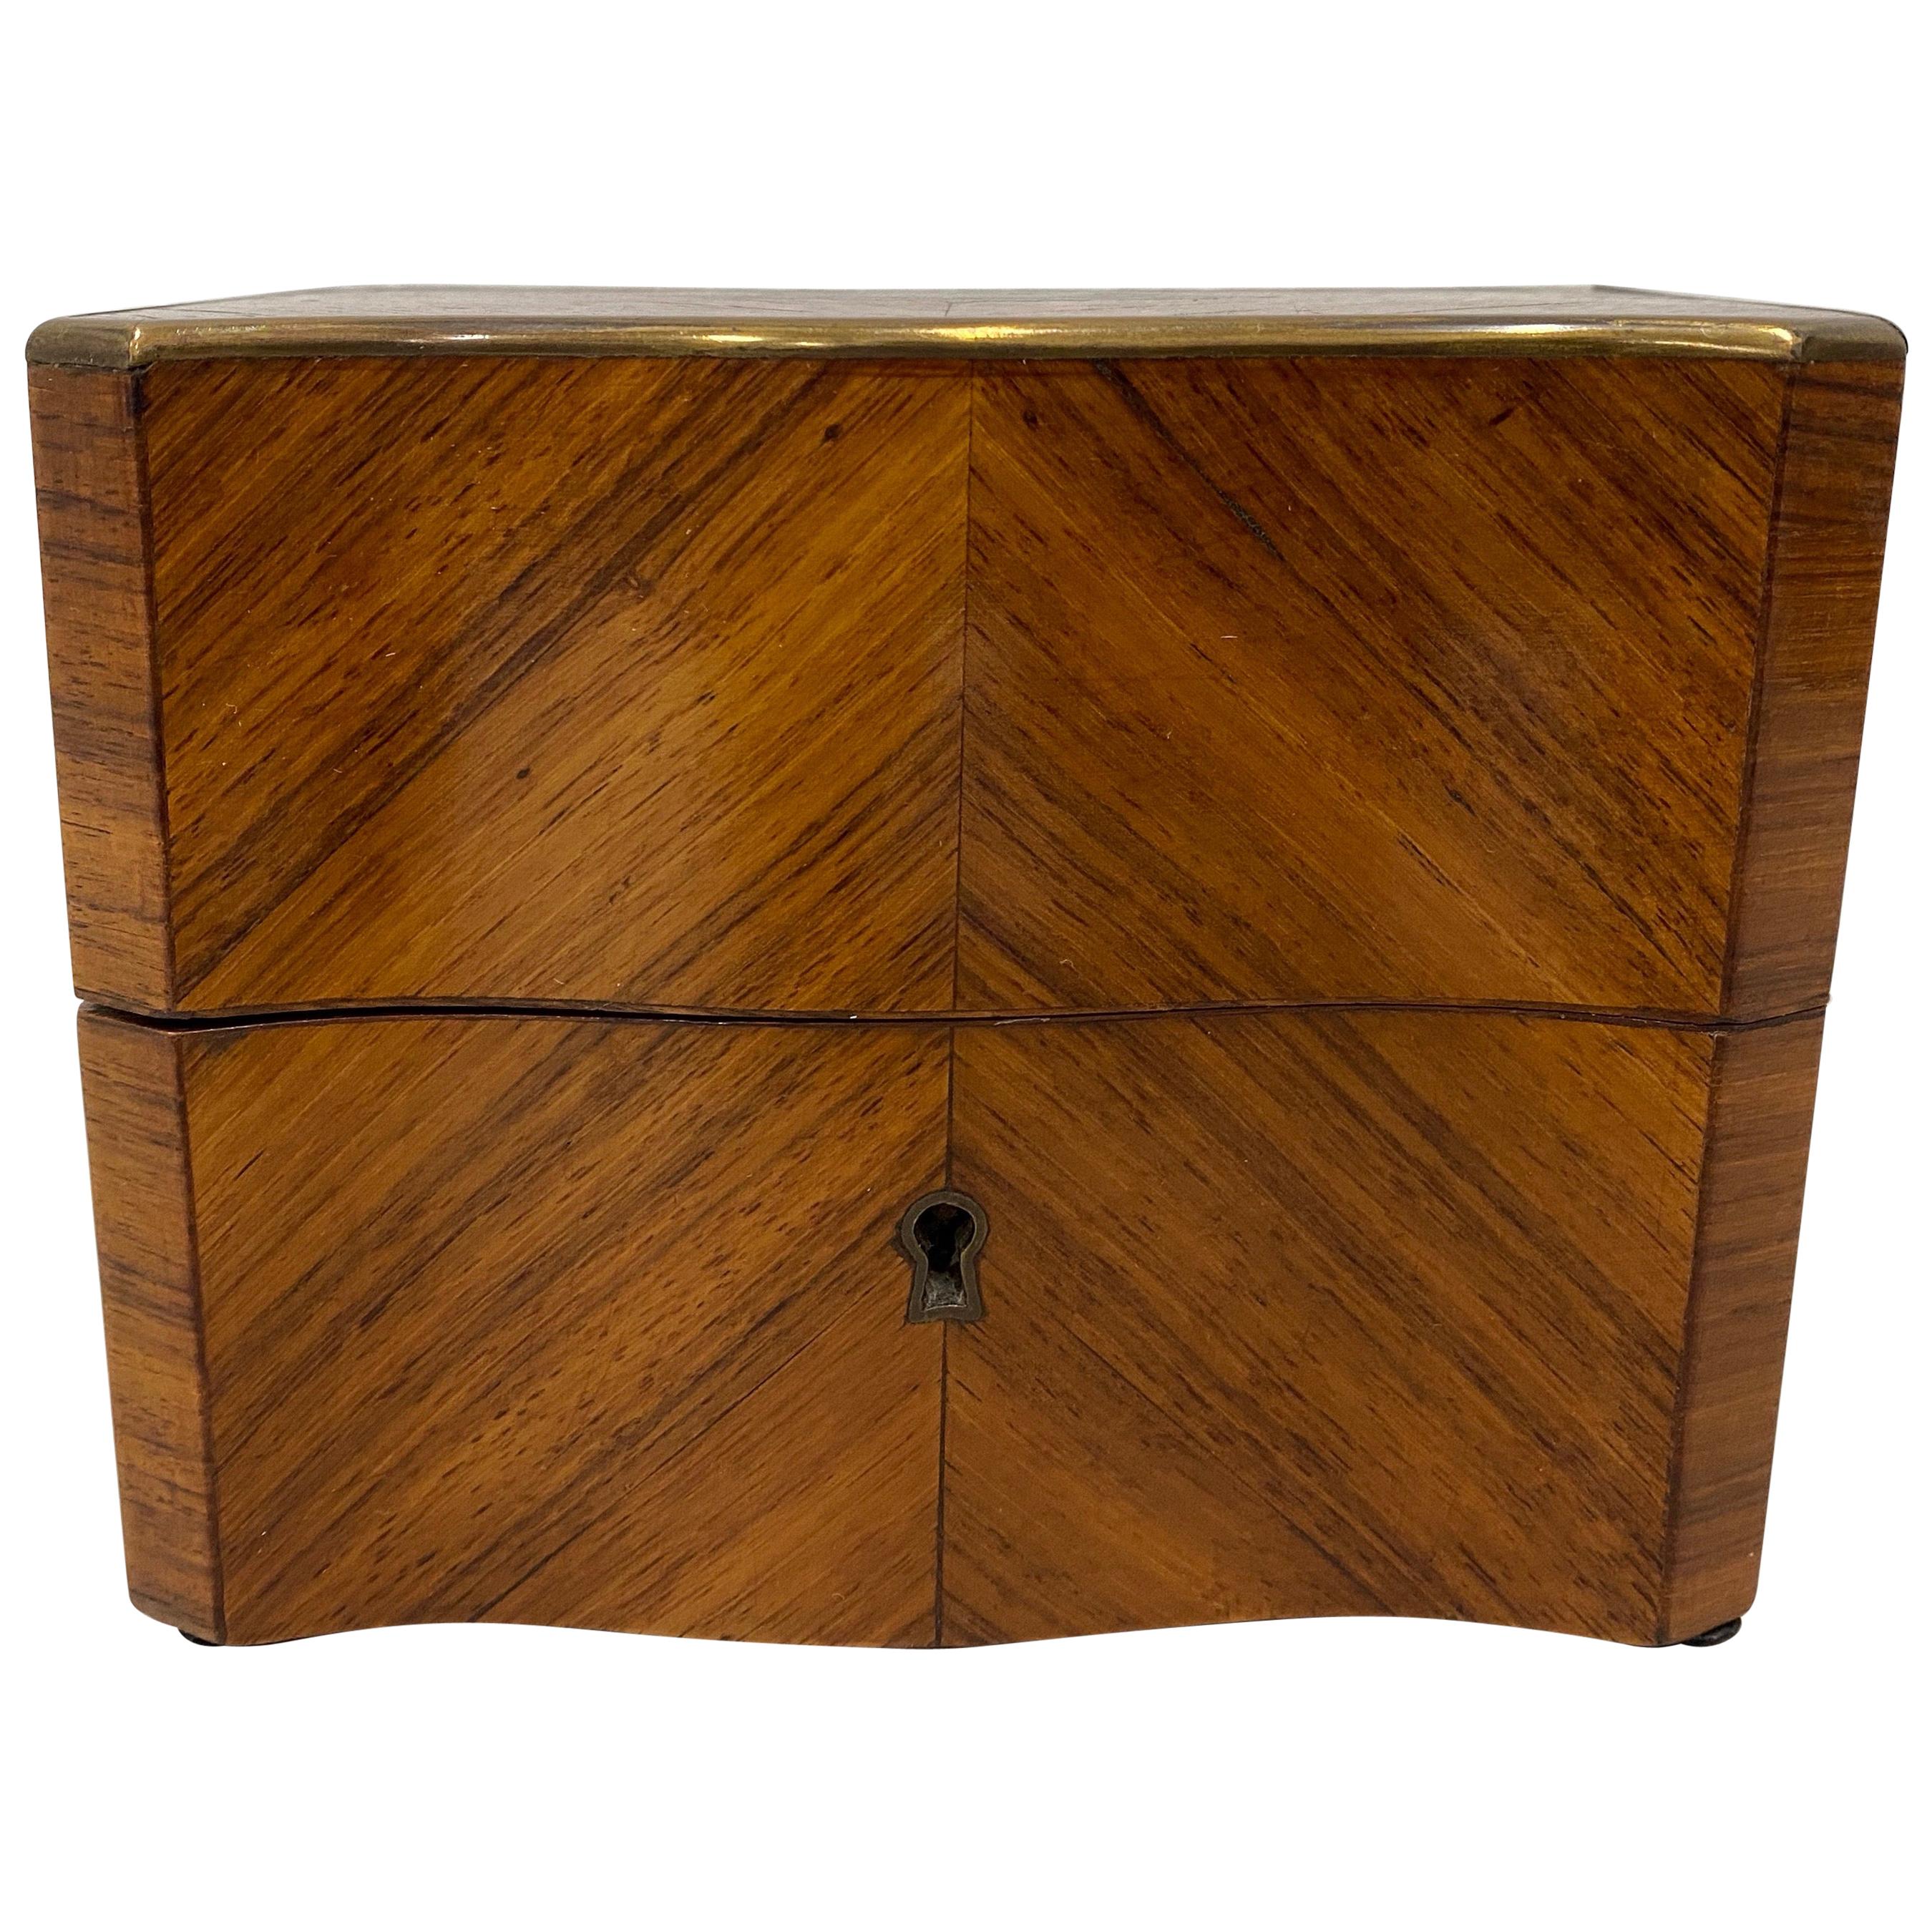 19th Century Cross Banded Mahogany Box with Brass Inlay For Sale